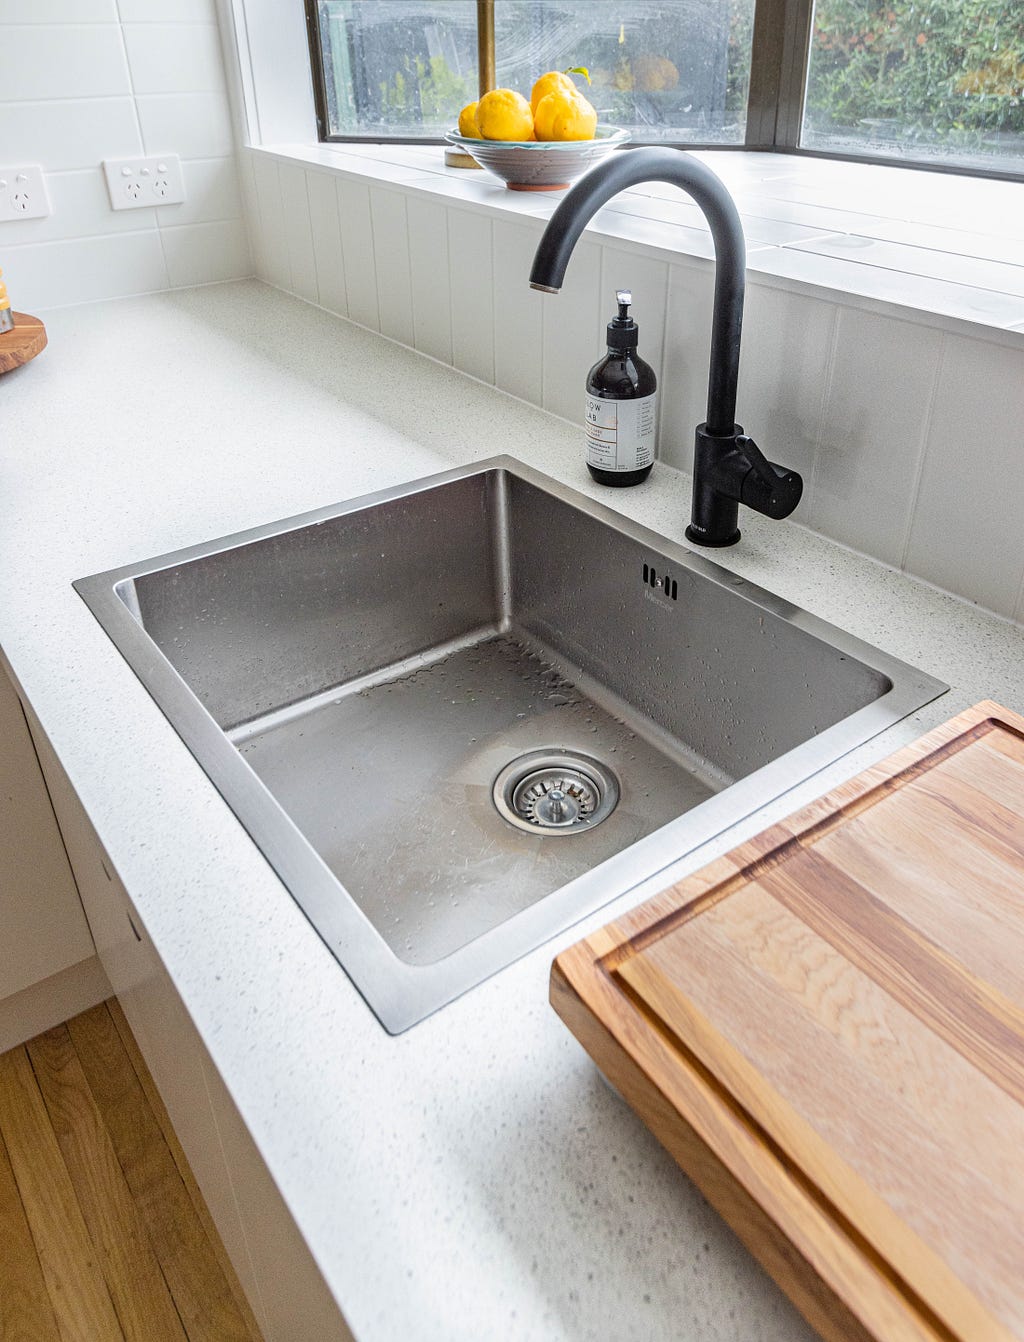 Image of a sink